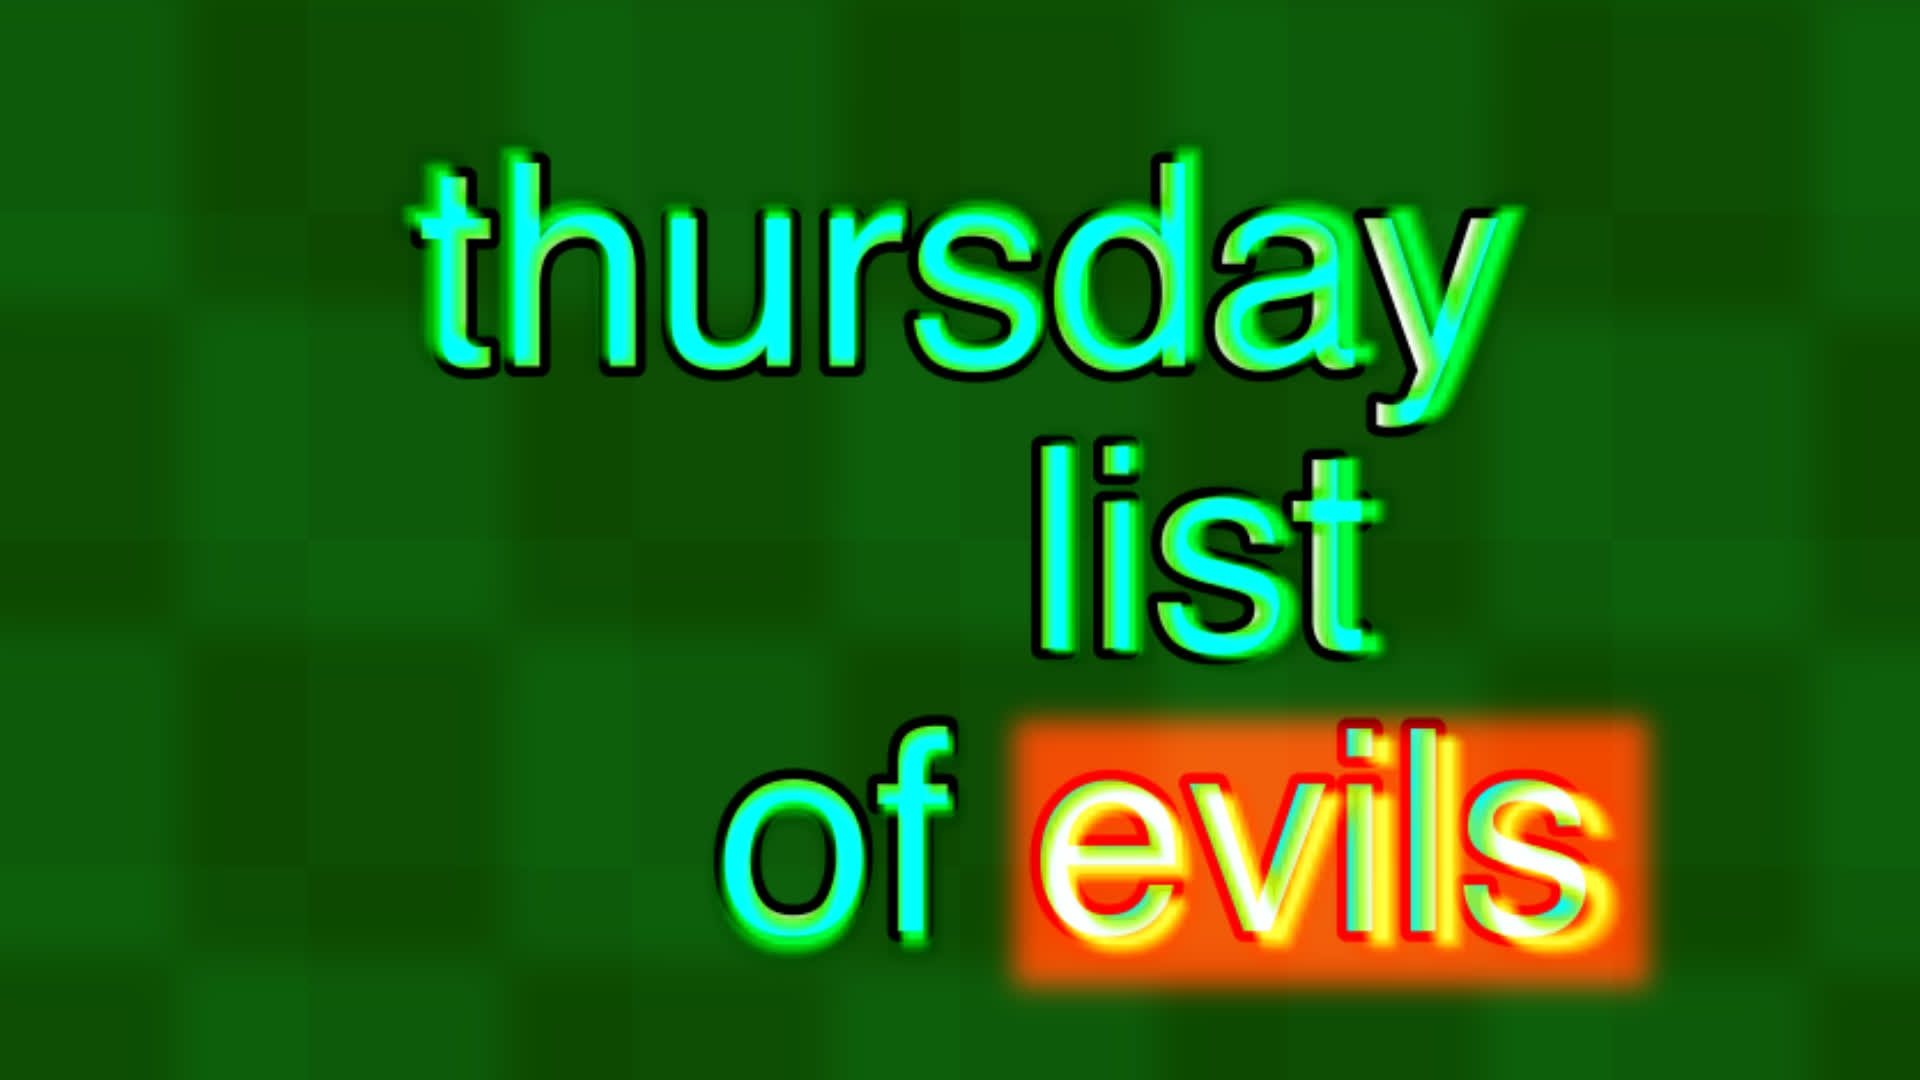 list of evils